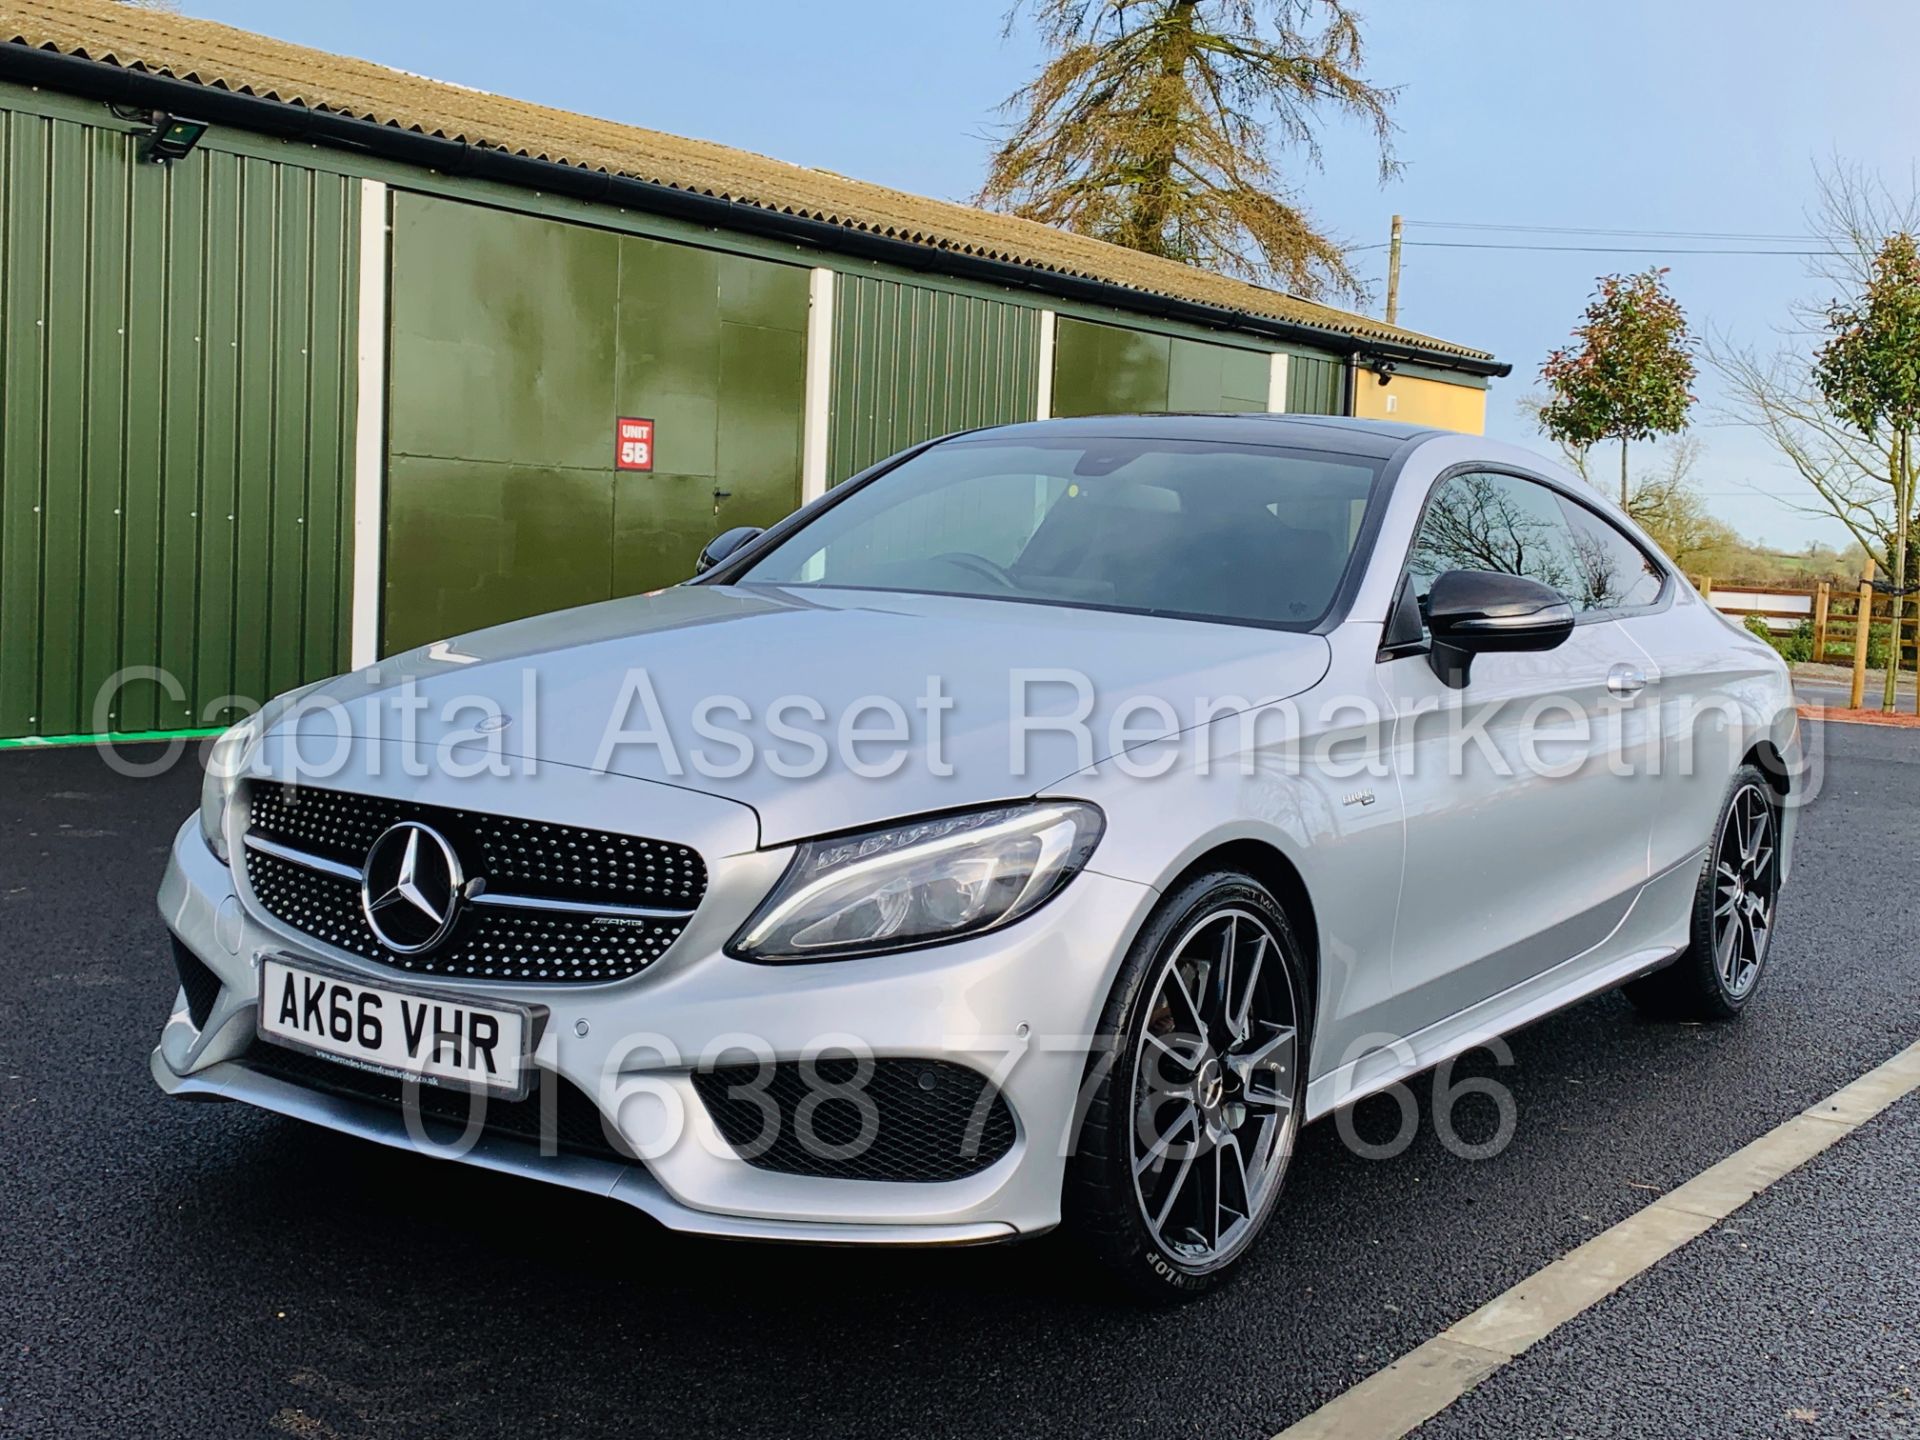 MERCEDES-BENZ C43 AMG *PREMIUM 4 MATIC* COUPE (2017) '9-G AUTO - LEATHER - SAT NAV' **FULLY LOADED** - Image 2 of 67